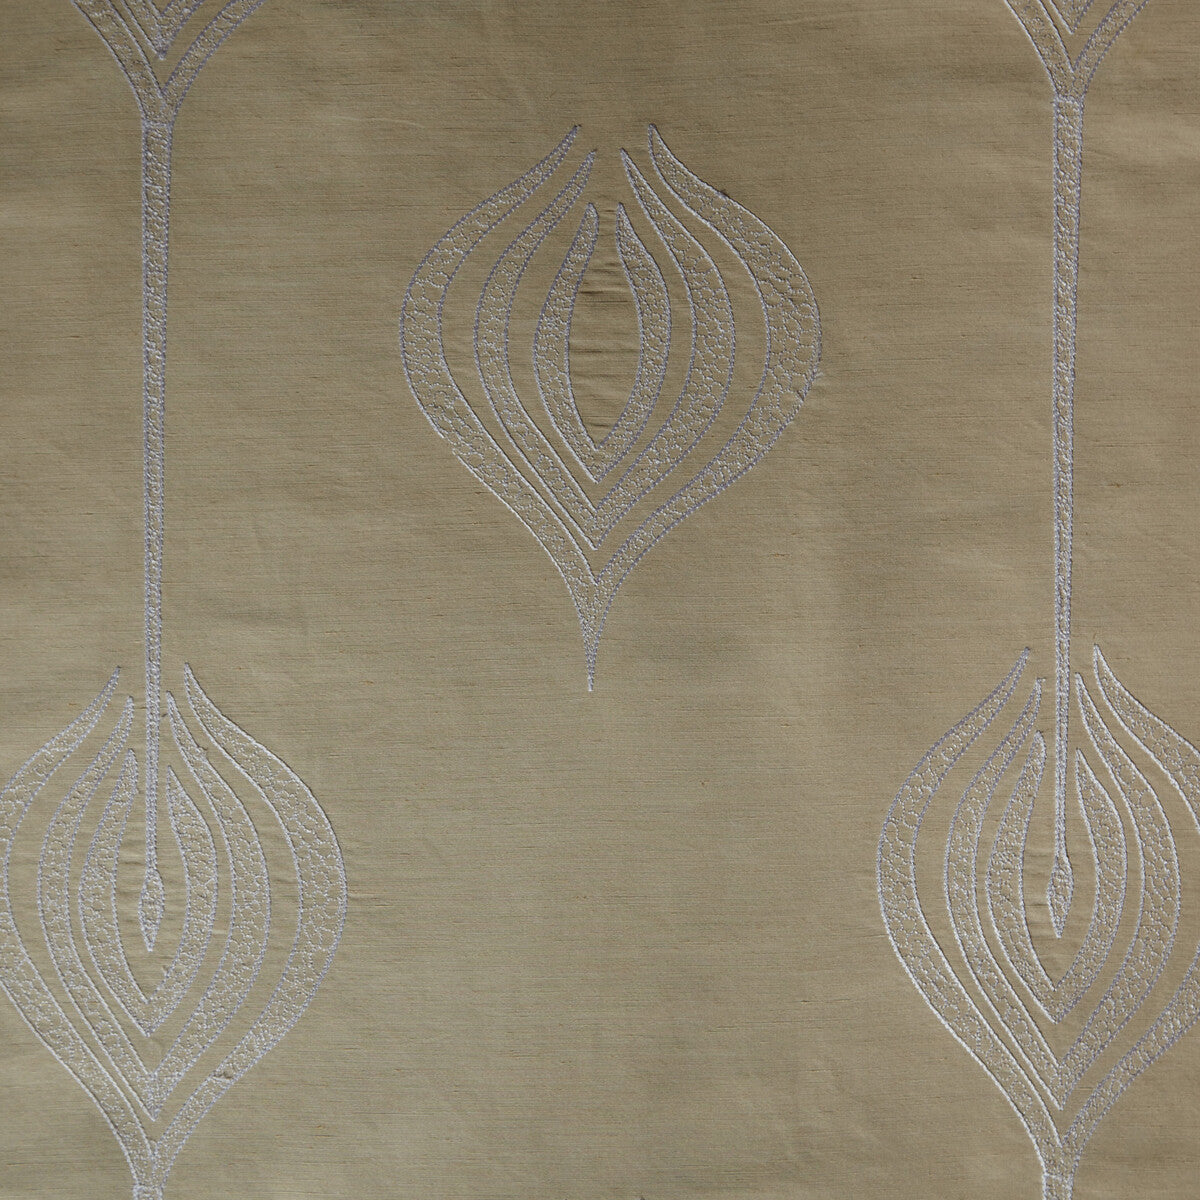 Tulip Embroidery fabric in cream color - pattern GWF-2928.16.0 - by Lee Jofa Modern in the Allegra Hicks II collection